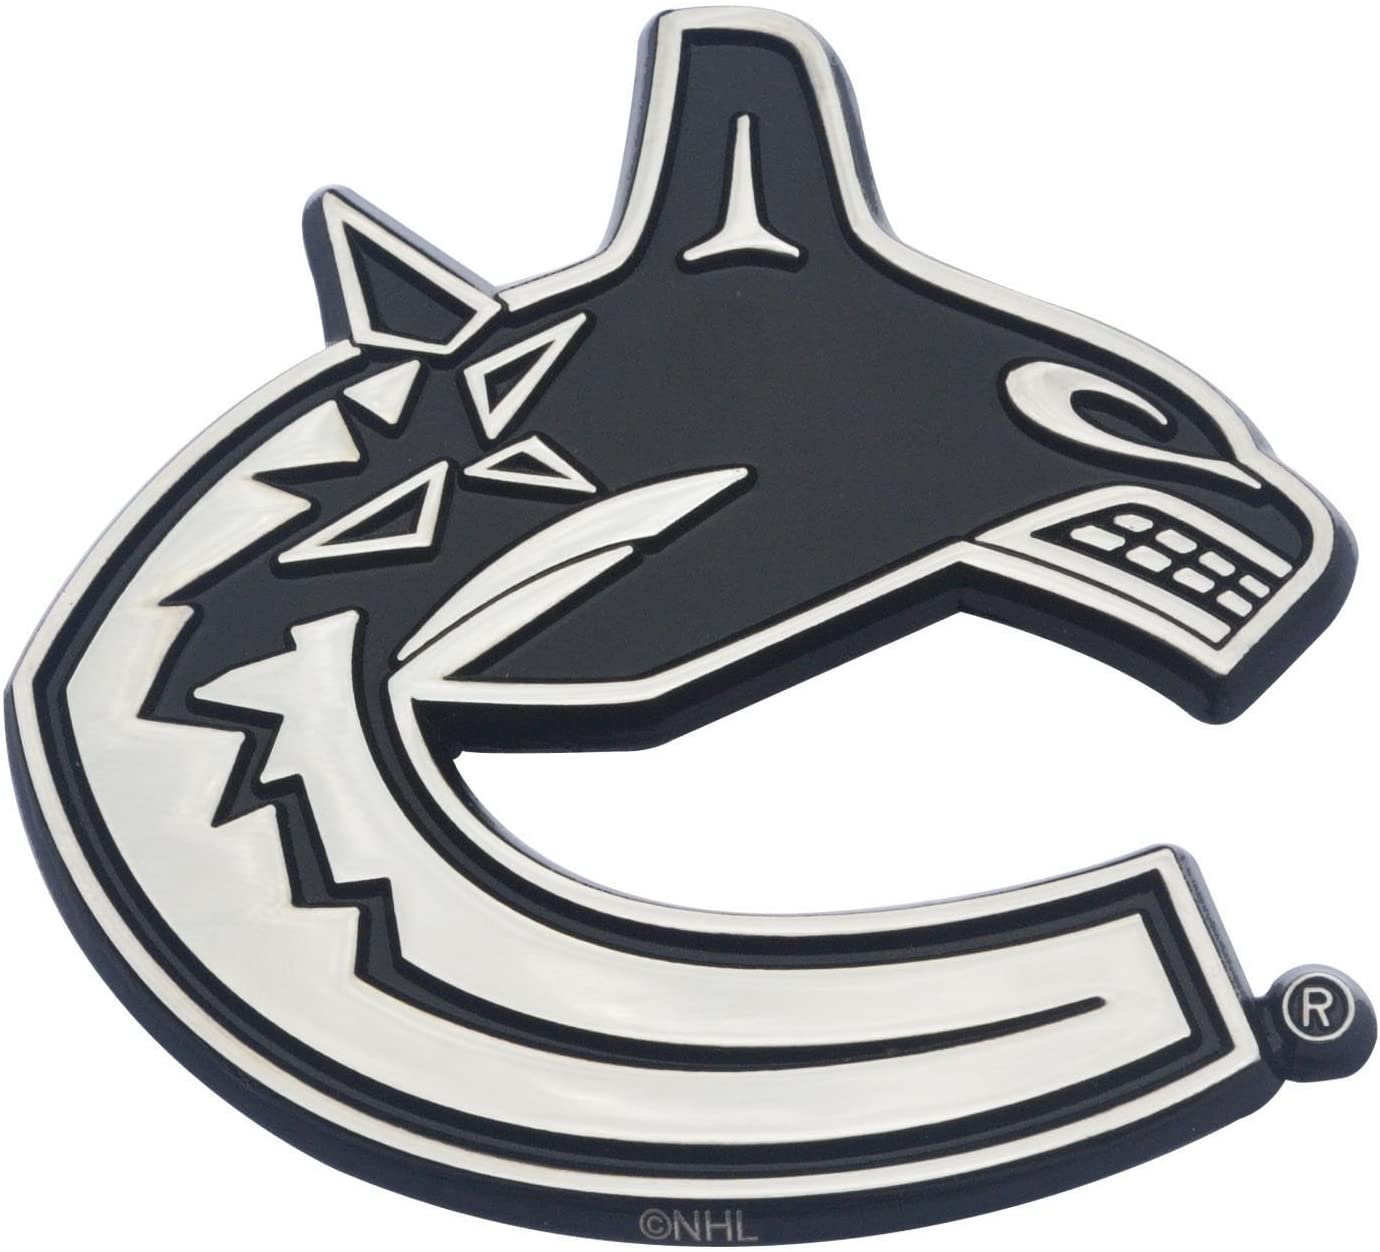 Vancouver Canucks Solid Metal Raised Auto Emblem Decal Adhesive Backing